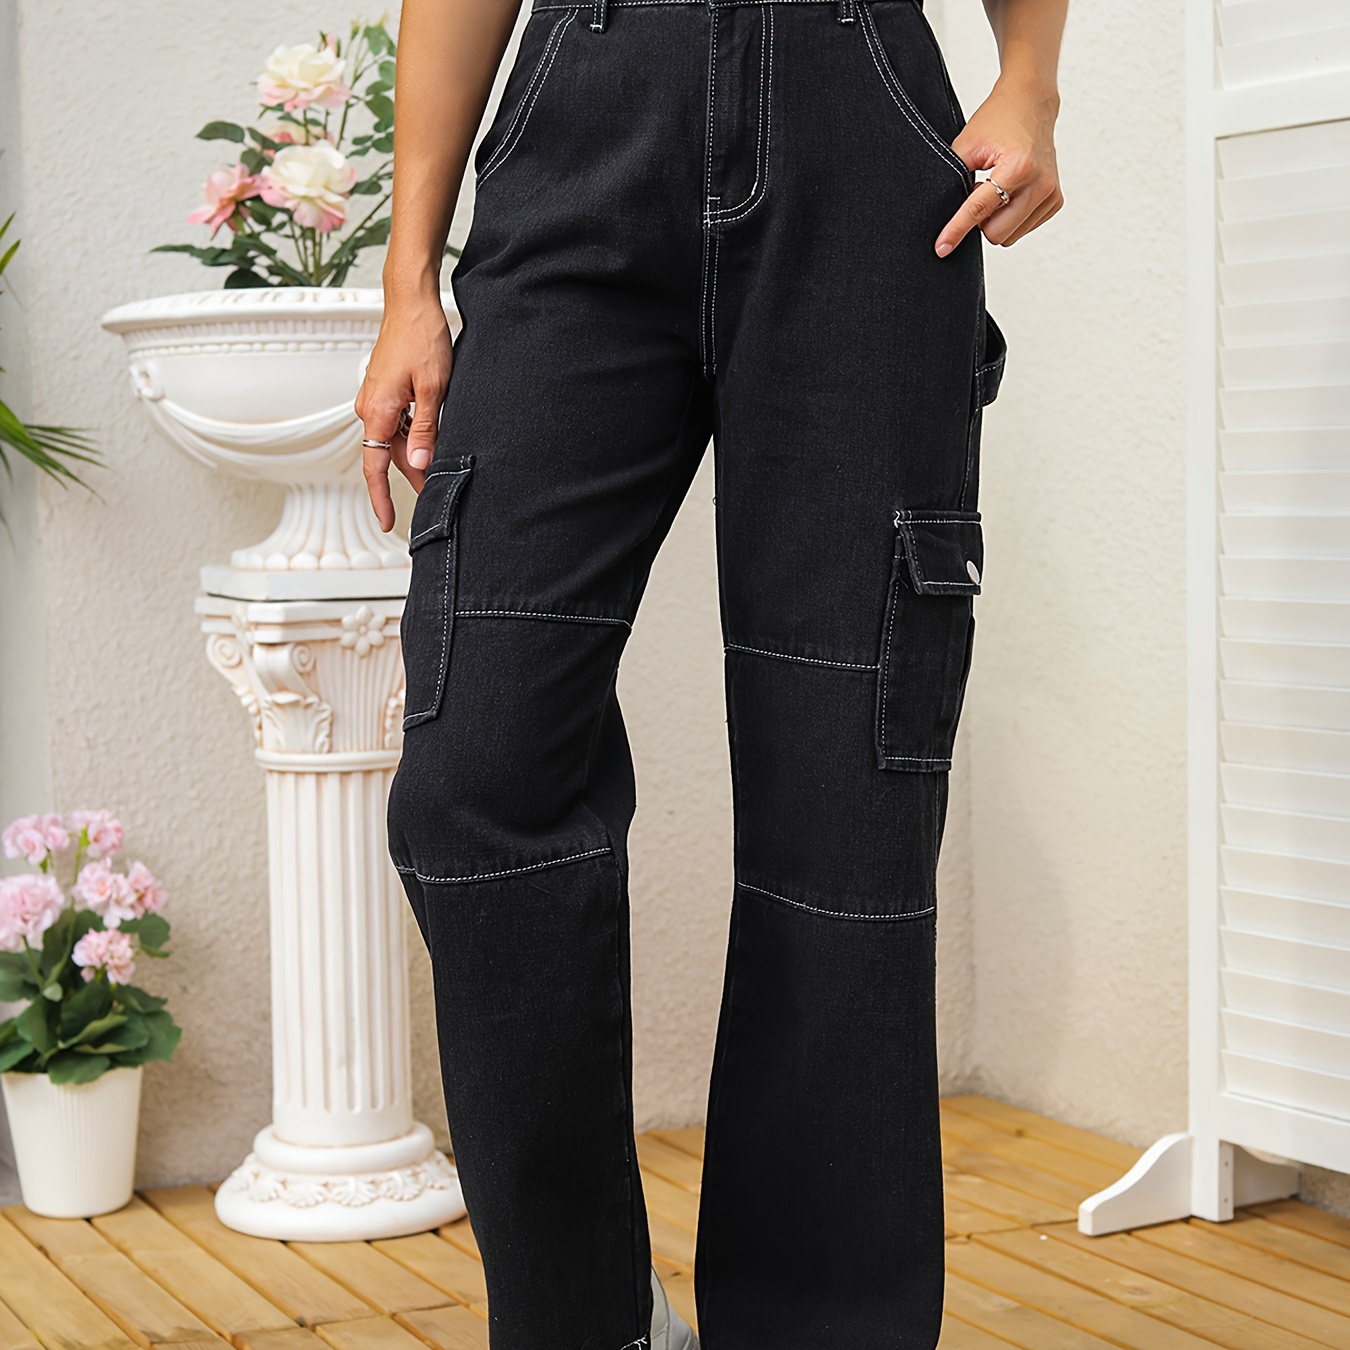 Black Flap Pockets Straight Jeans, Loose Fit Non-Stretch Casual Cargo  Pants, Y2K & Kpop Style, Women's Denim Jeans & Clothing